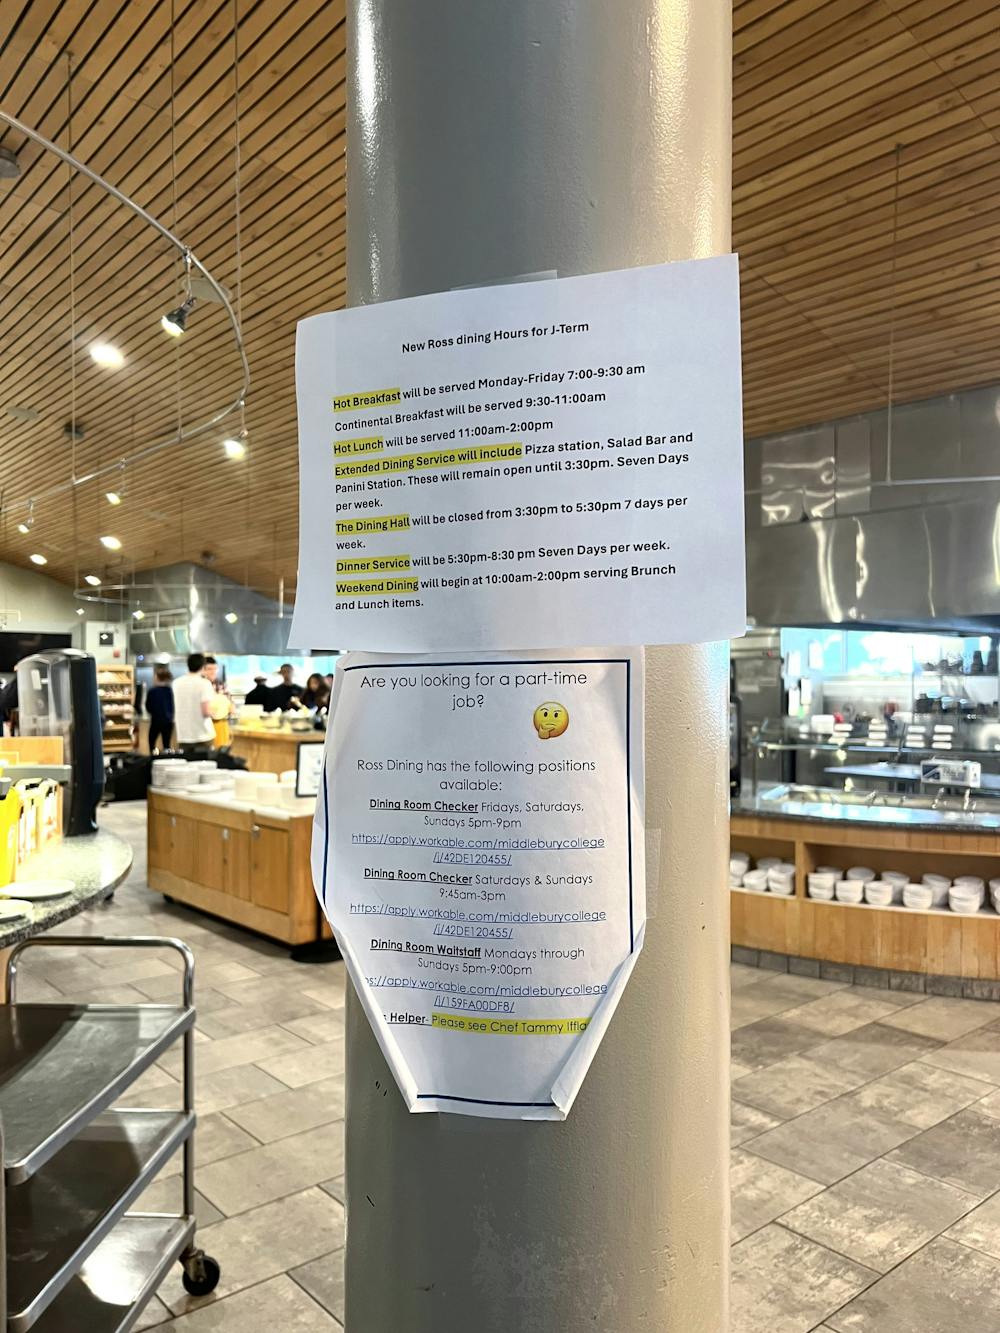 Dining Services informed students of the changes to the hours of Ross Dining by posting notices in and around the dining hall.